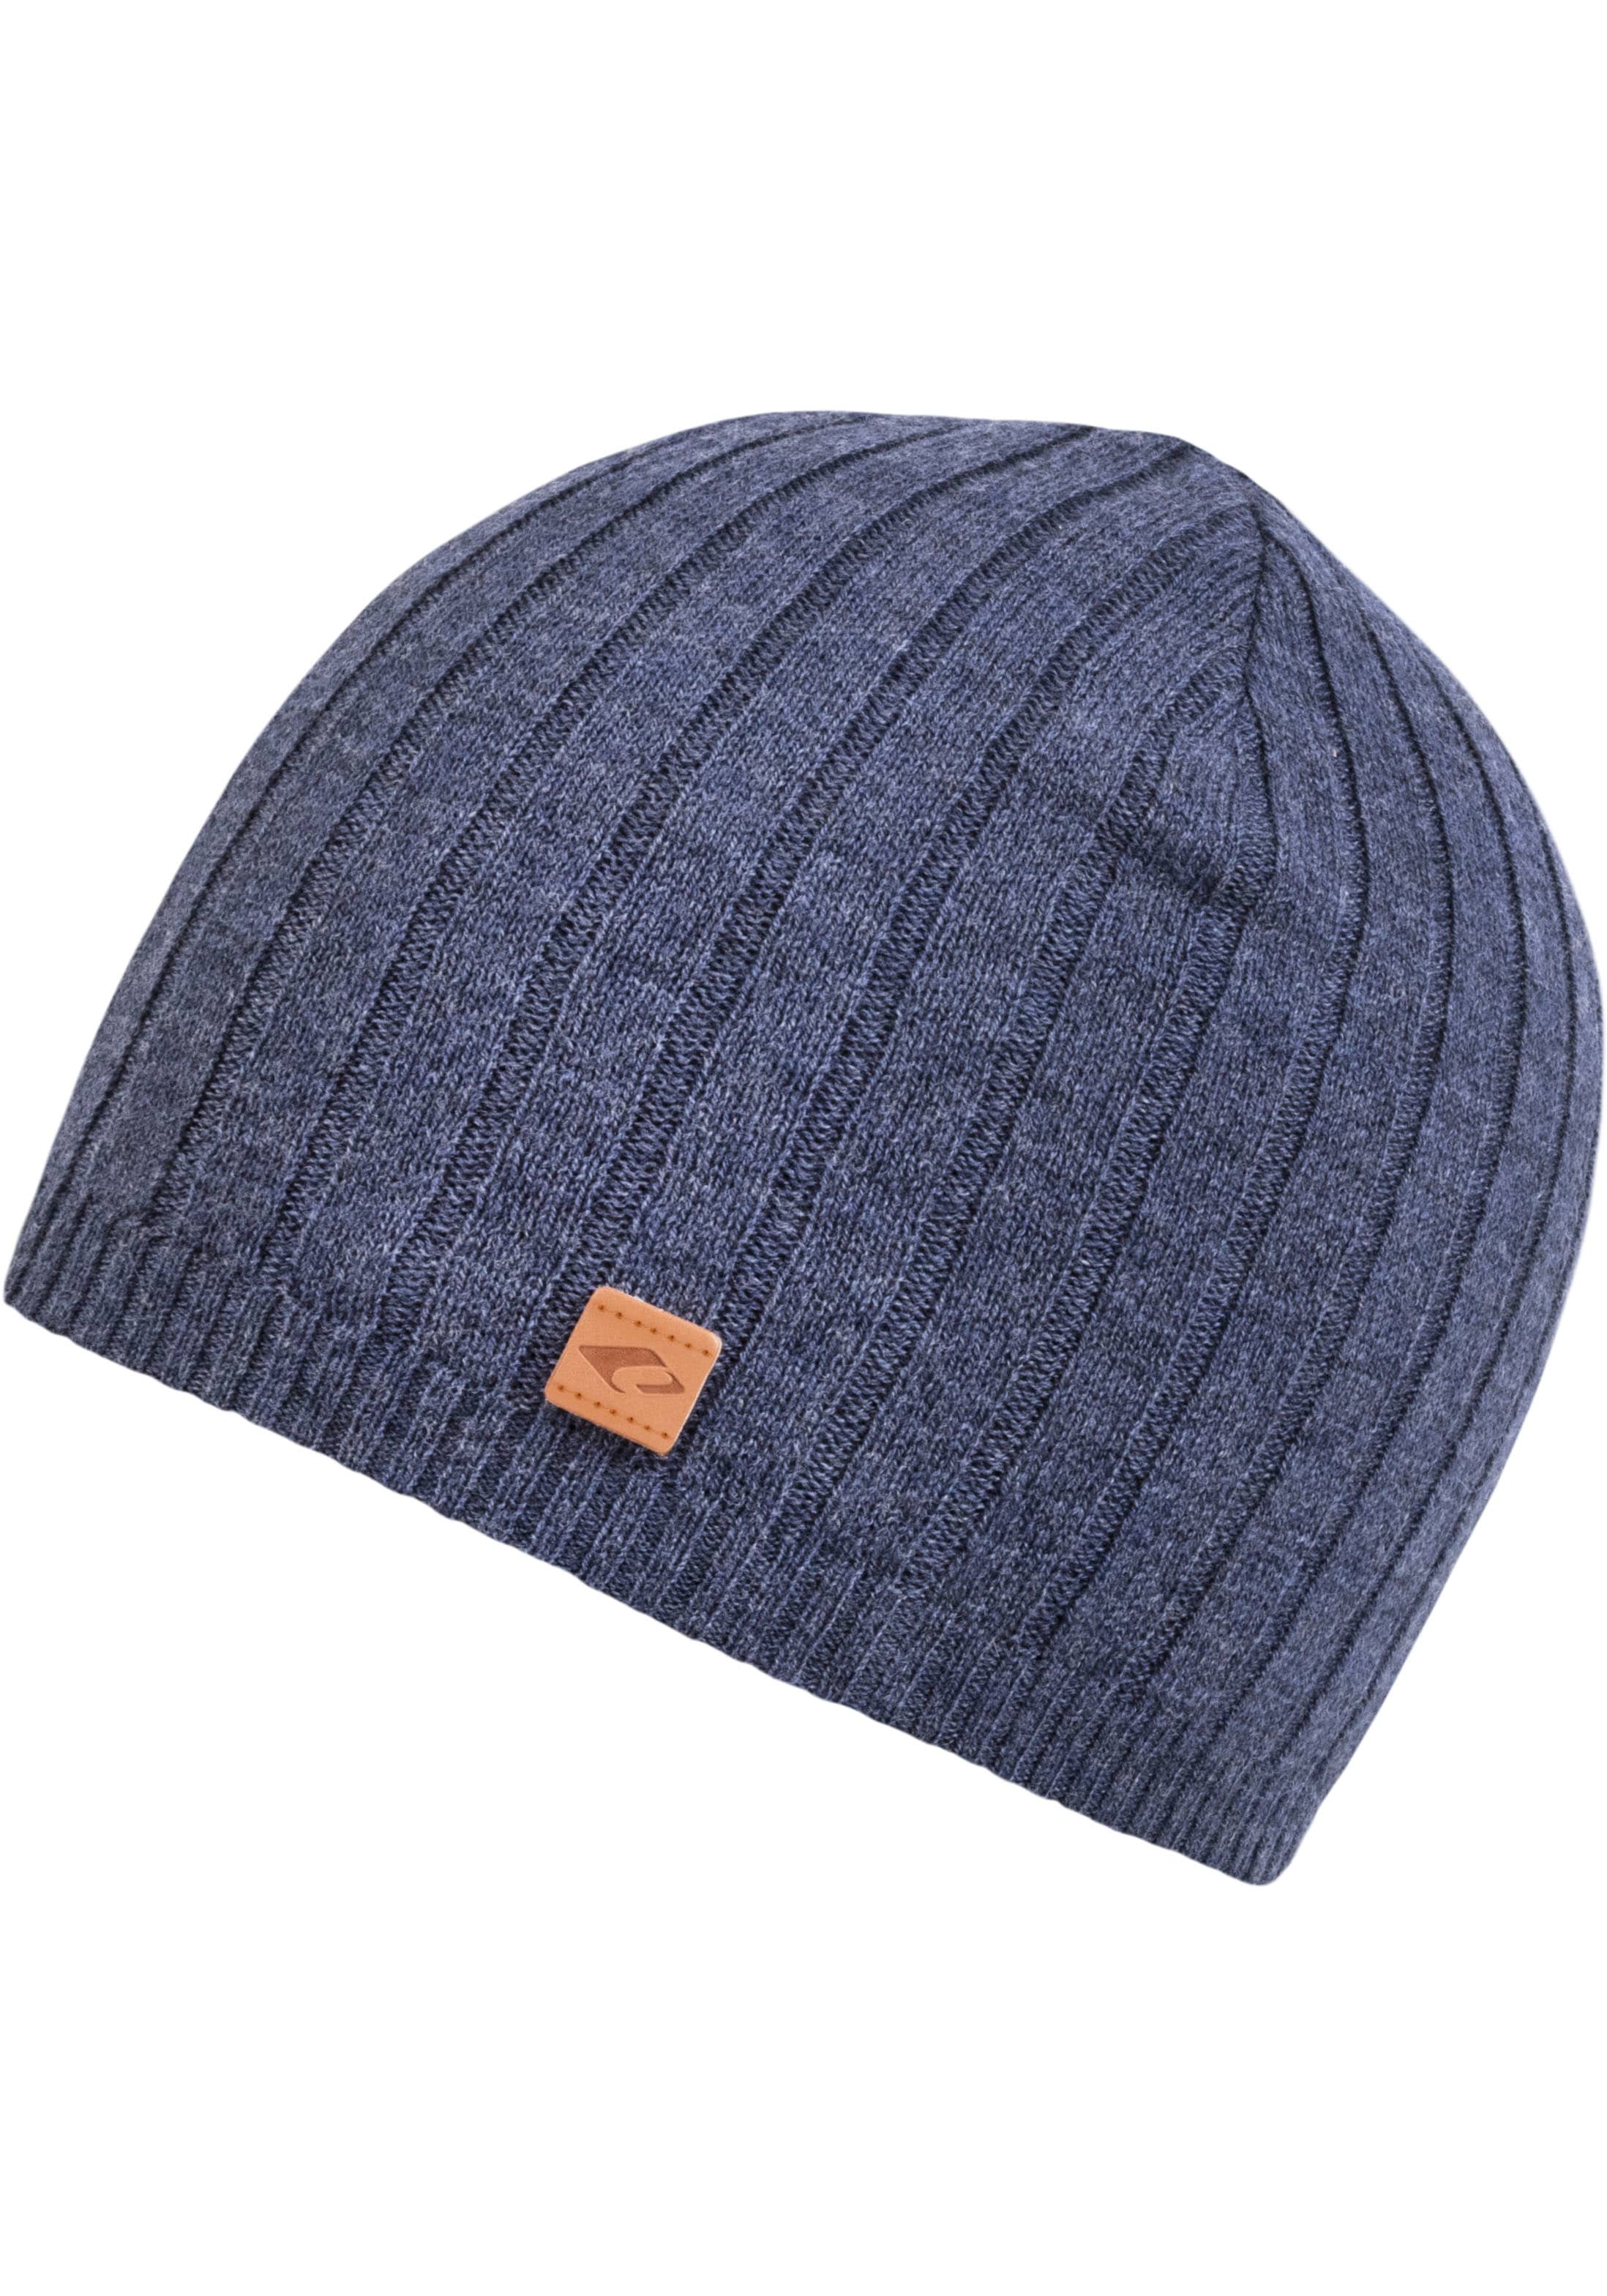 chillouts Beanie »Alfred Hat«, Doppellagig, angenehm warm